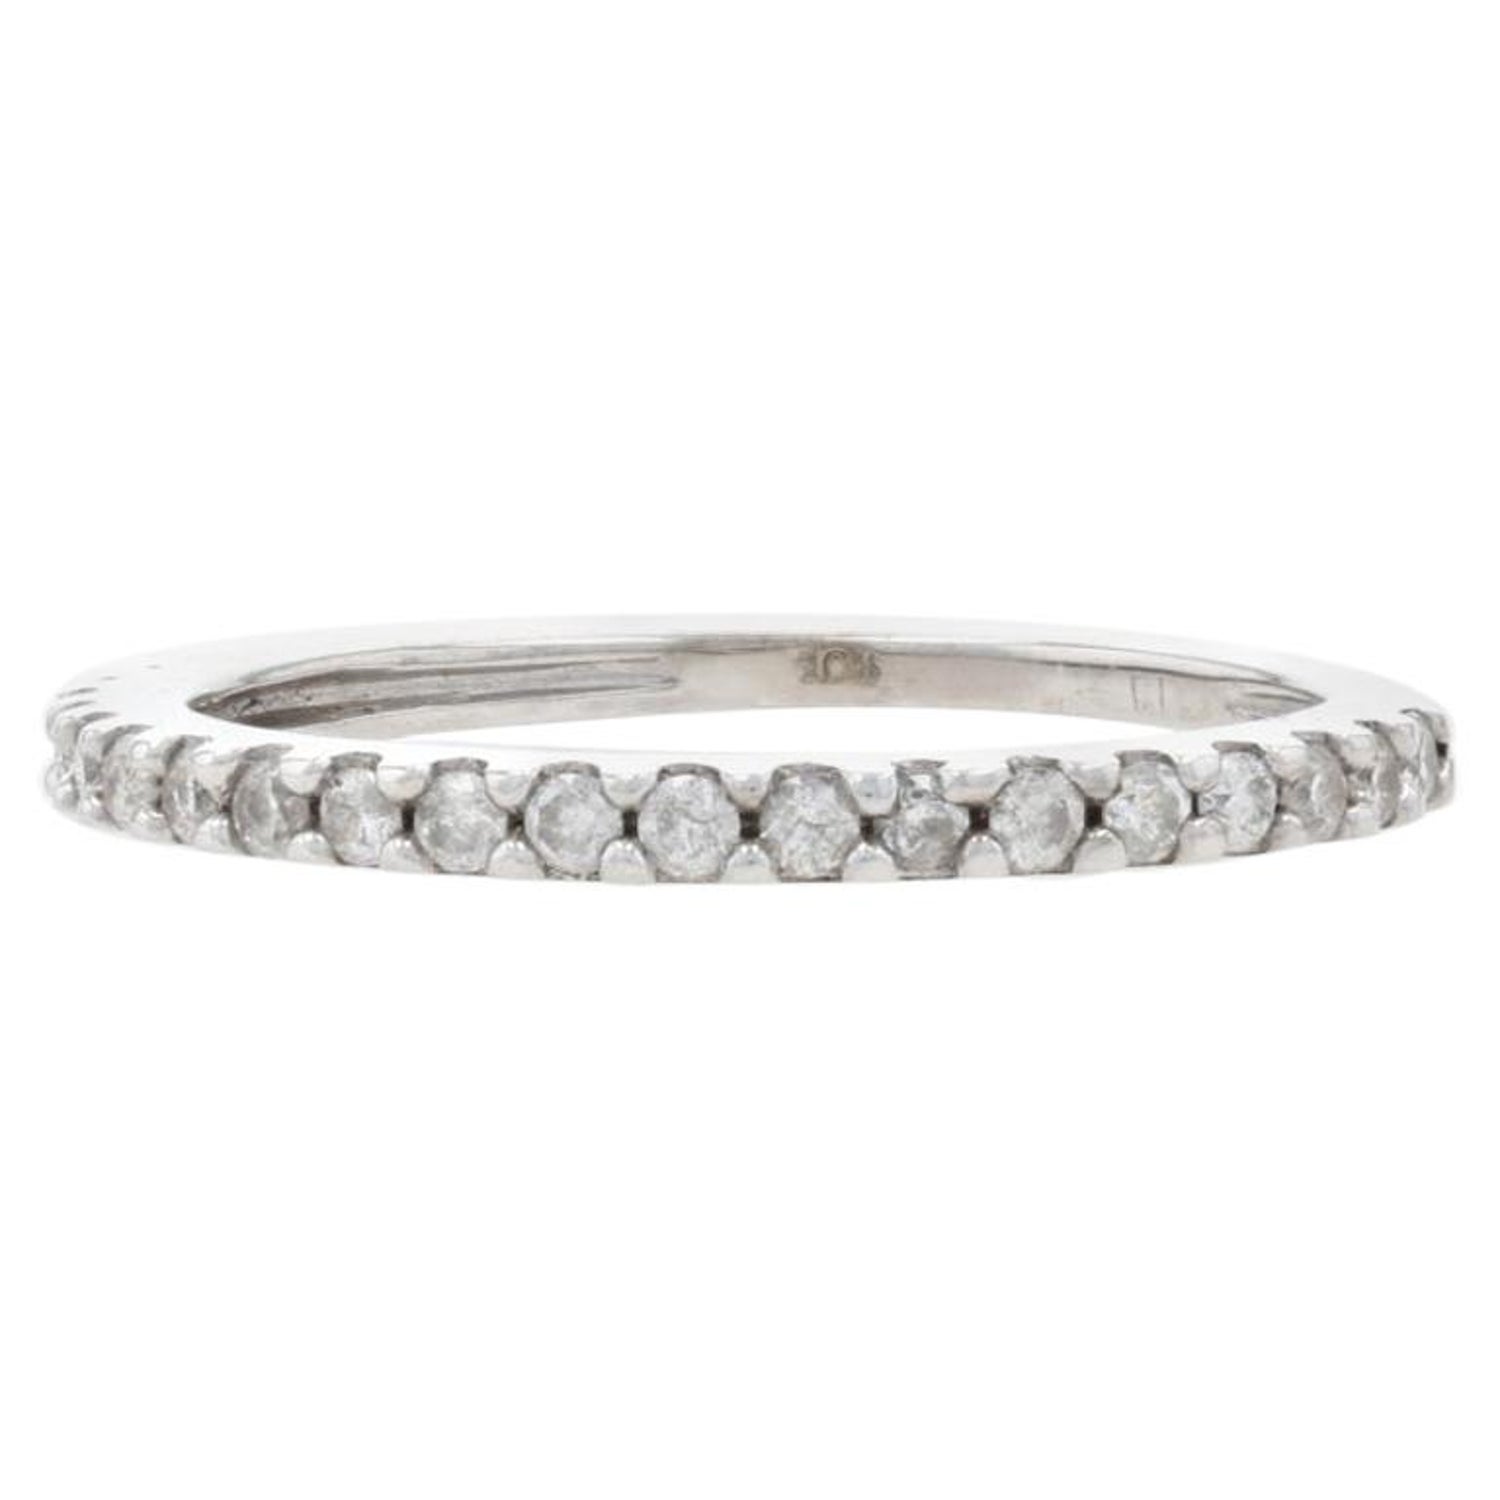 Dainty Modern Diamond Stackable Wedding Band in 10k White Gold